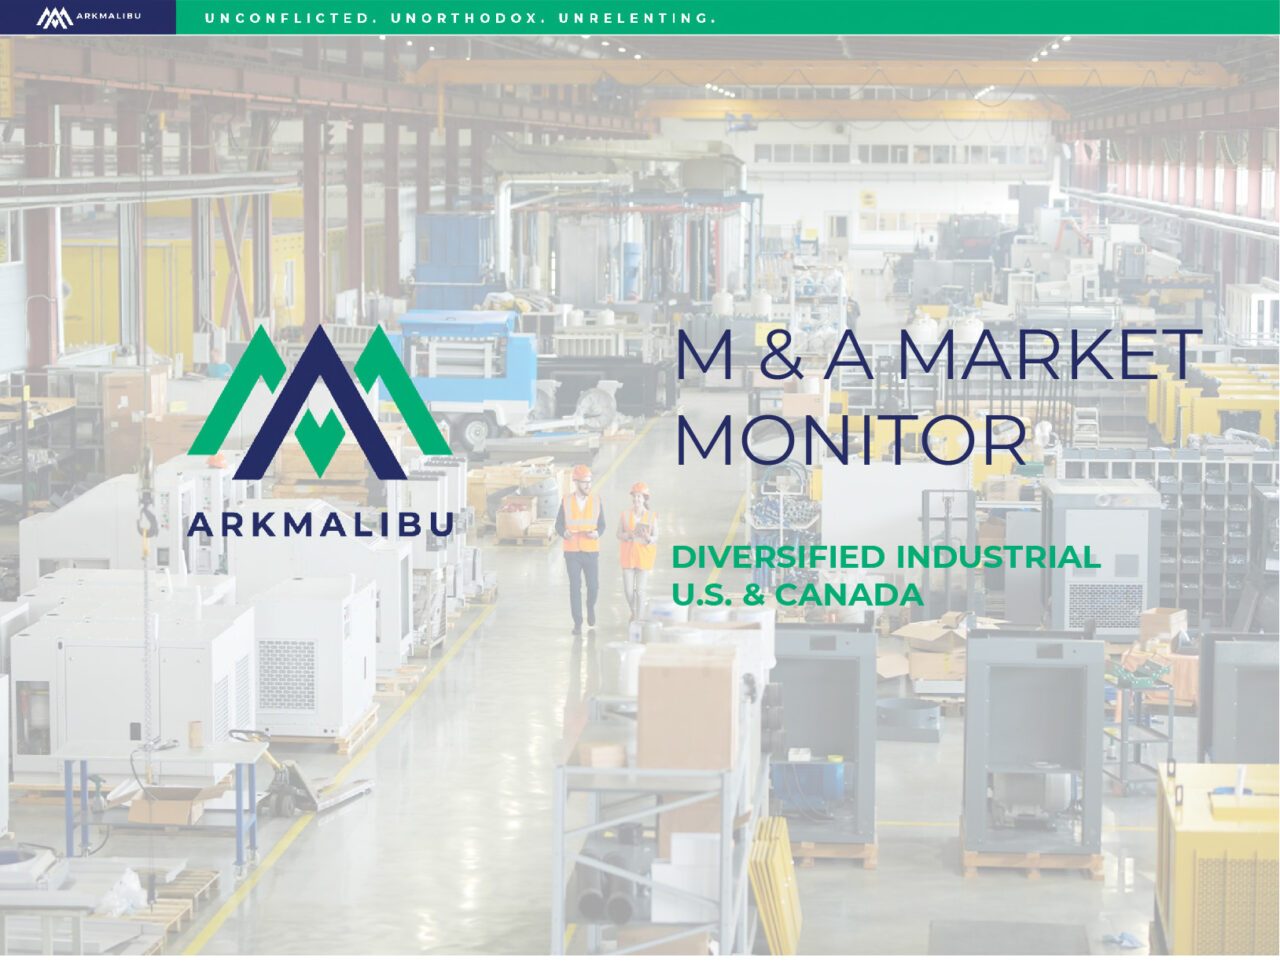 Market Monitor Cover for Diversified Industrial. Faded Image of an industrial warehouse in the background